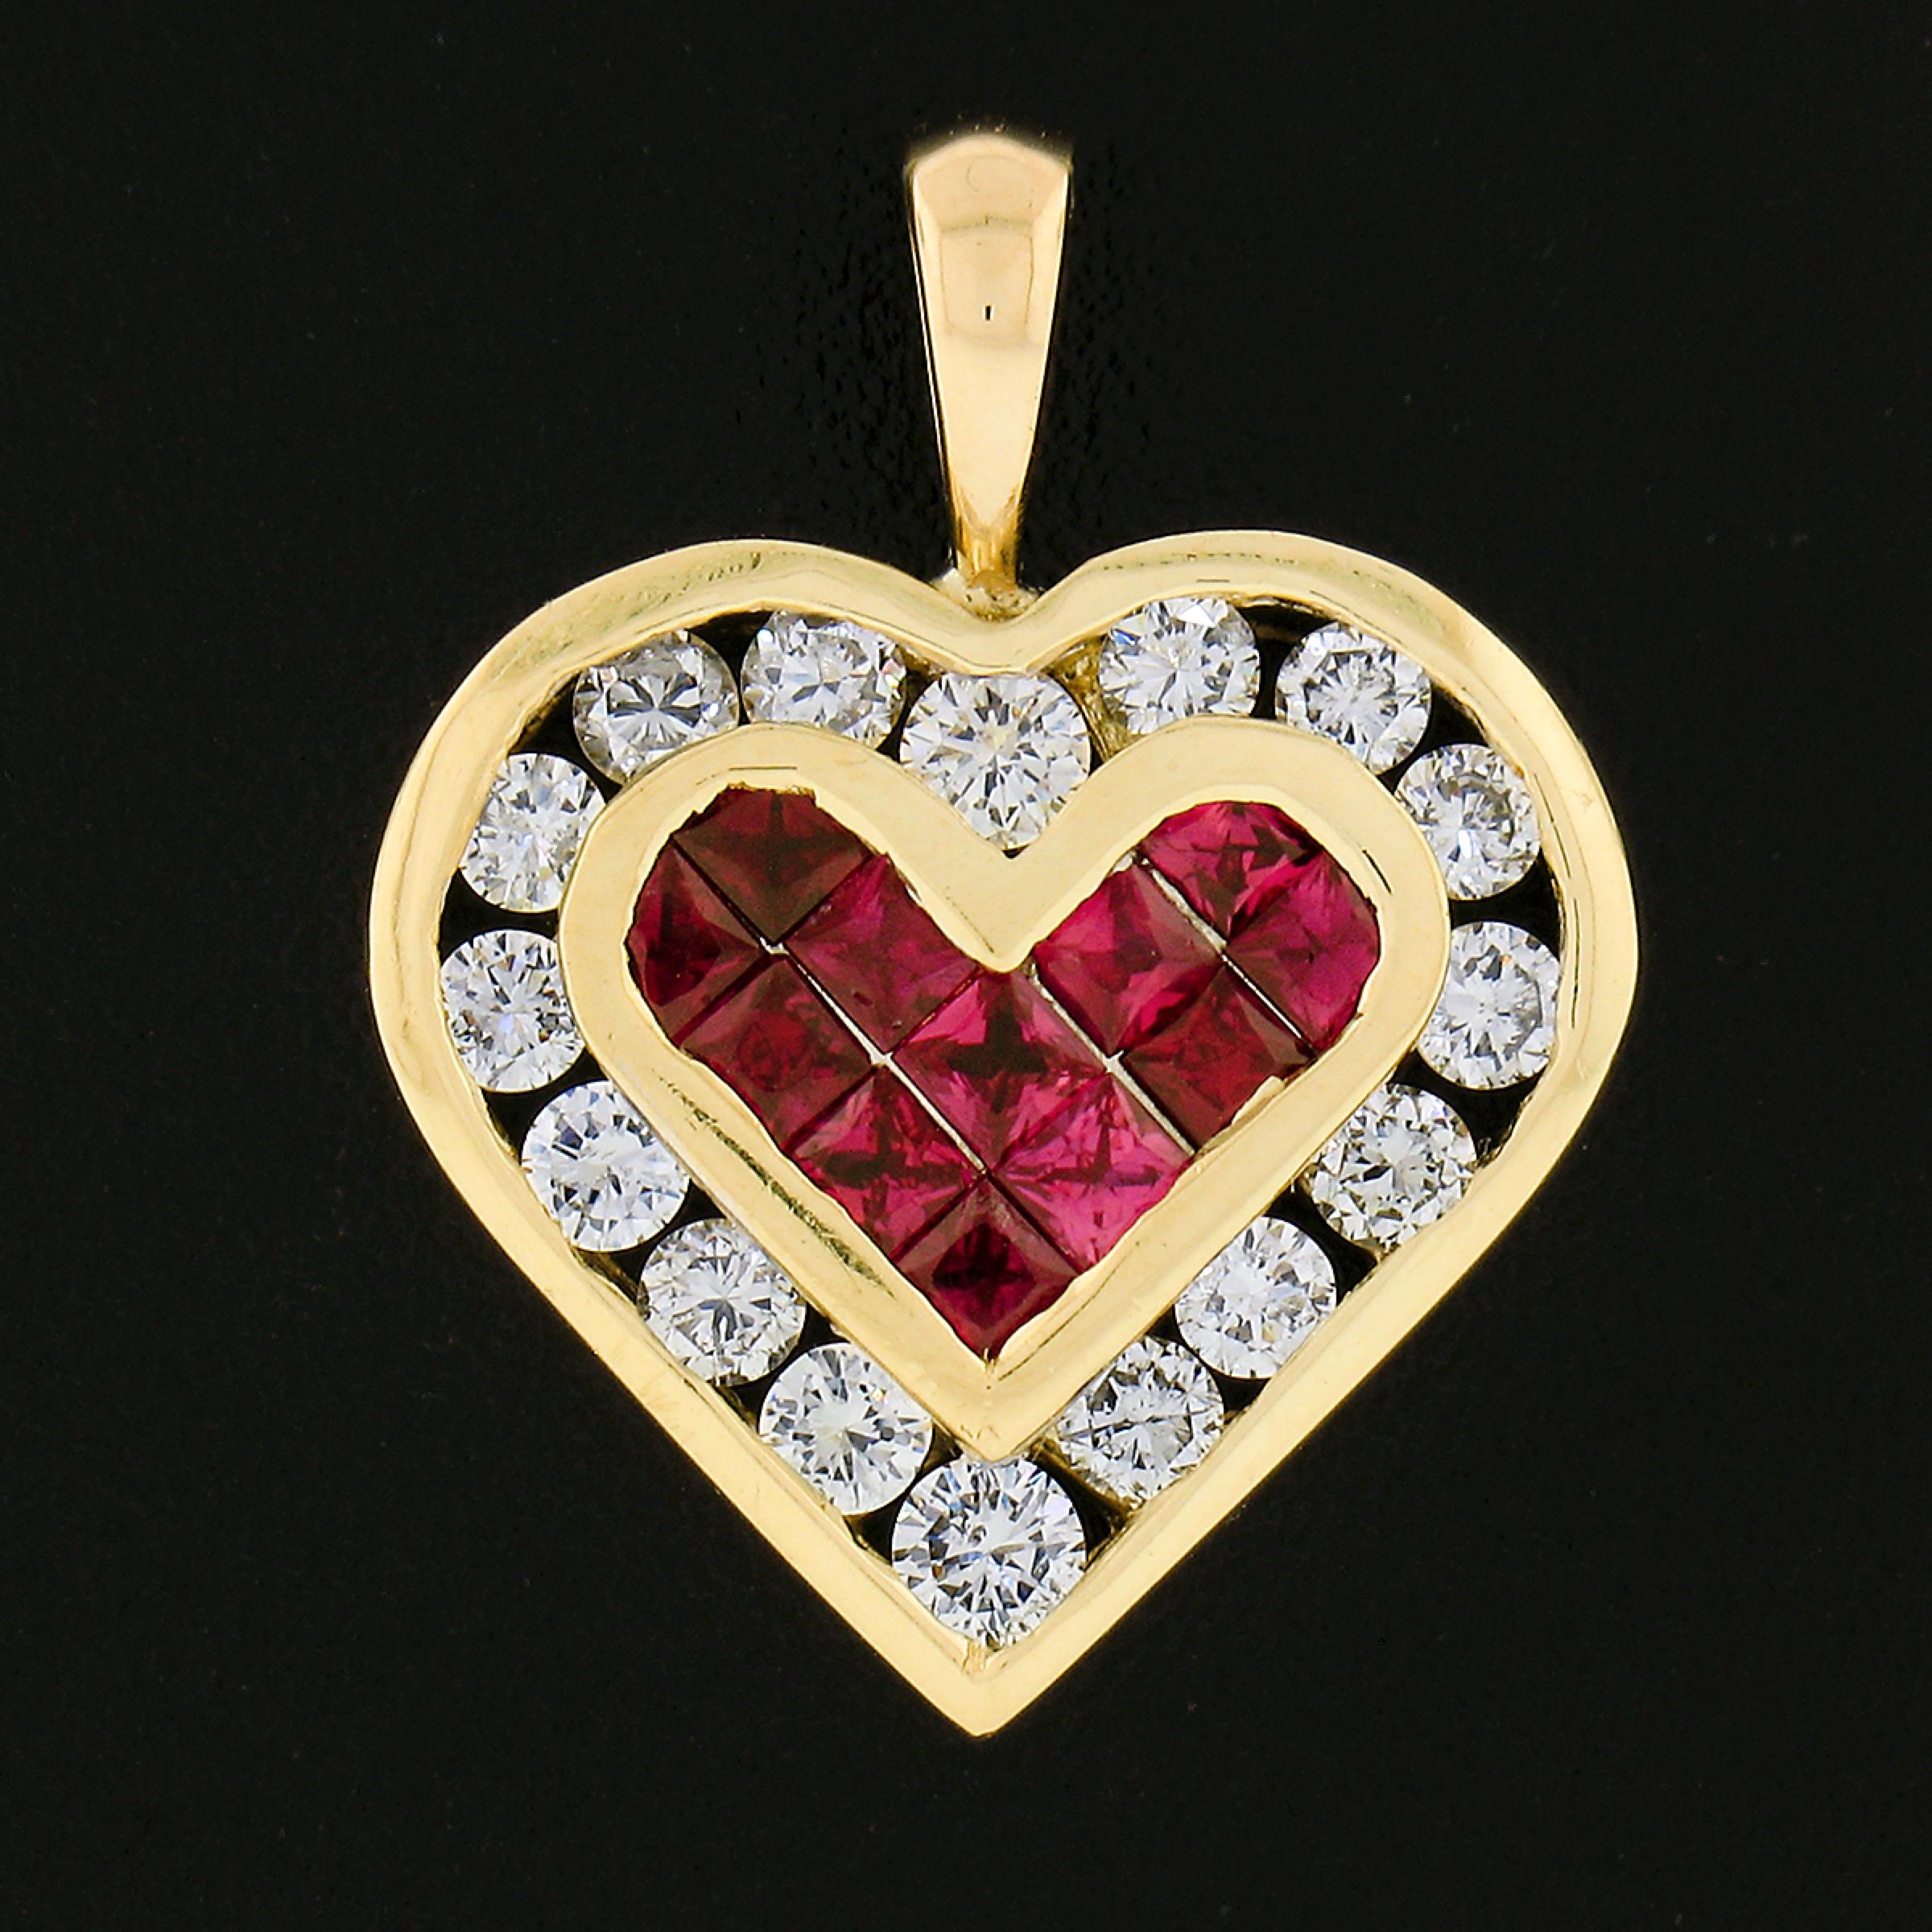 You are looking at a very fine heart pendant crafted in solid 18k yellow gold featuring gorgeous natural rubies neatly set at the center of a fiery diamond halo. The rubies are square calibre cut and are neatly invisible set showing the most amazing